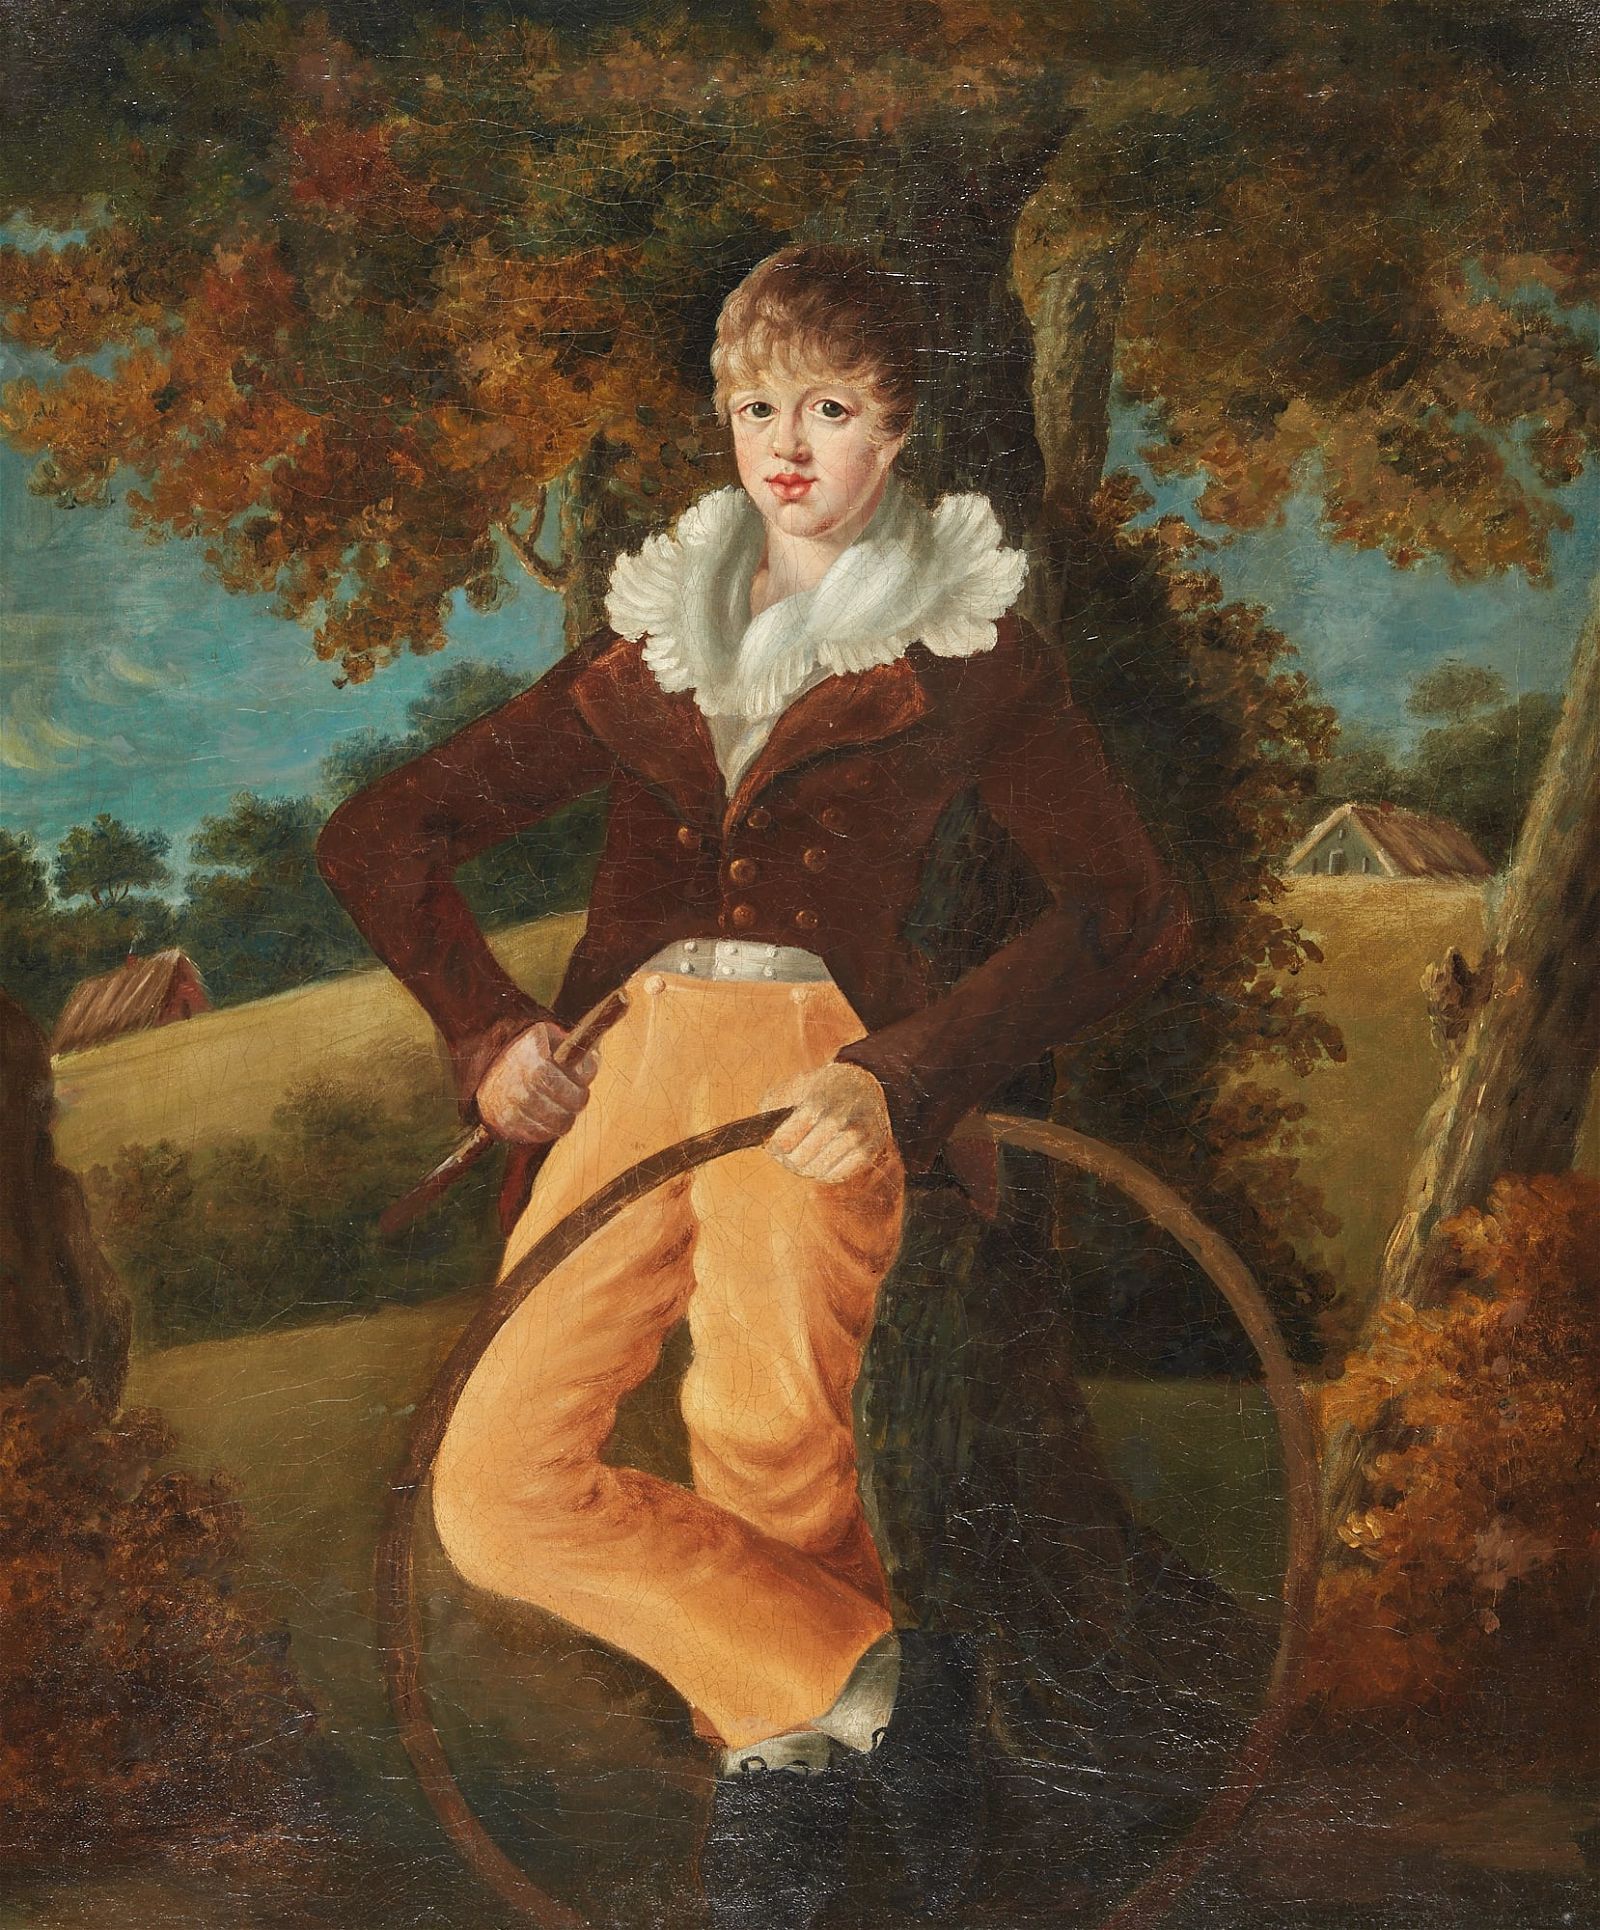 WILLIAM OWEN, YOUNG BOY WITH HOOP AND